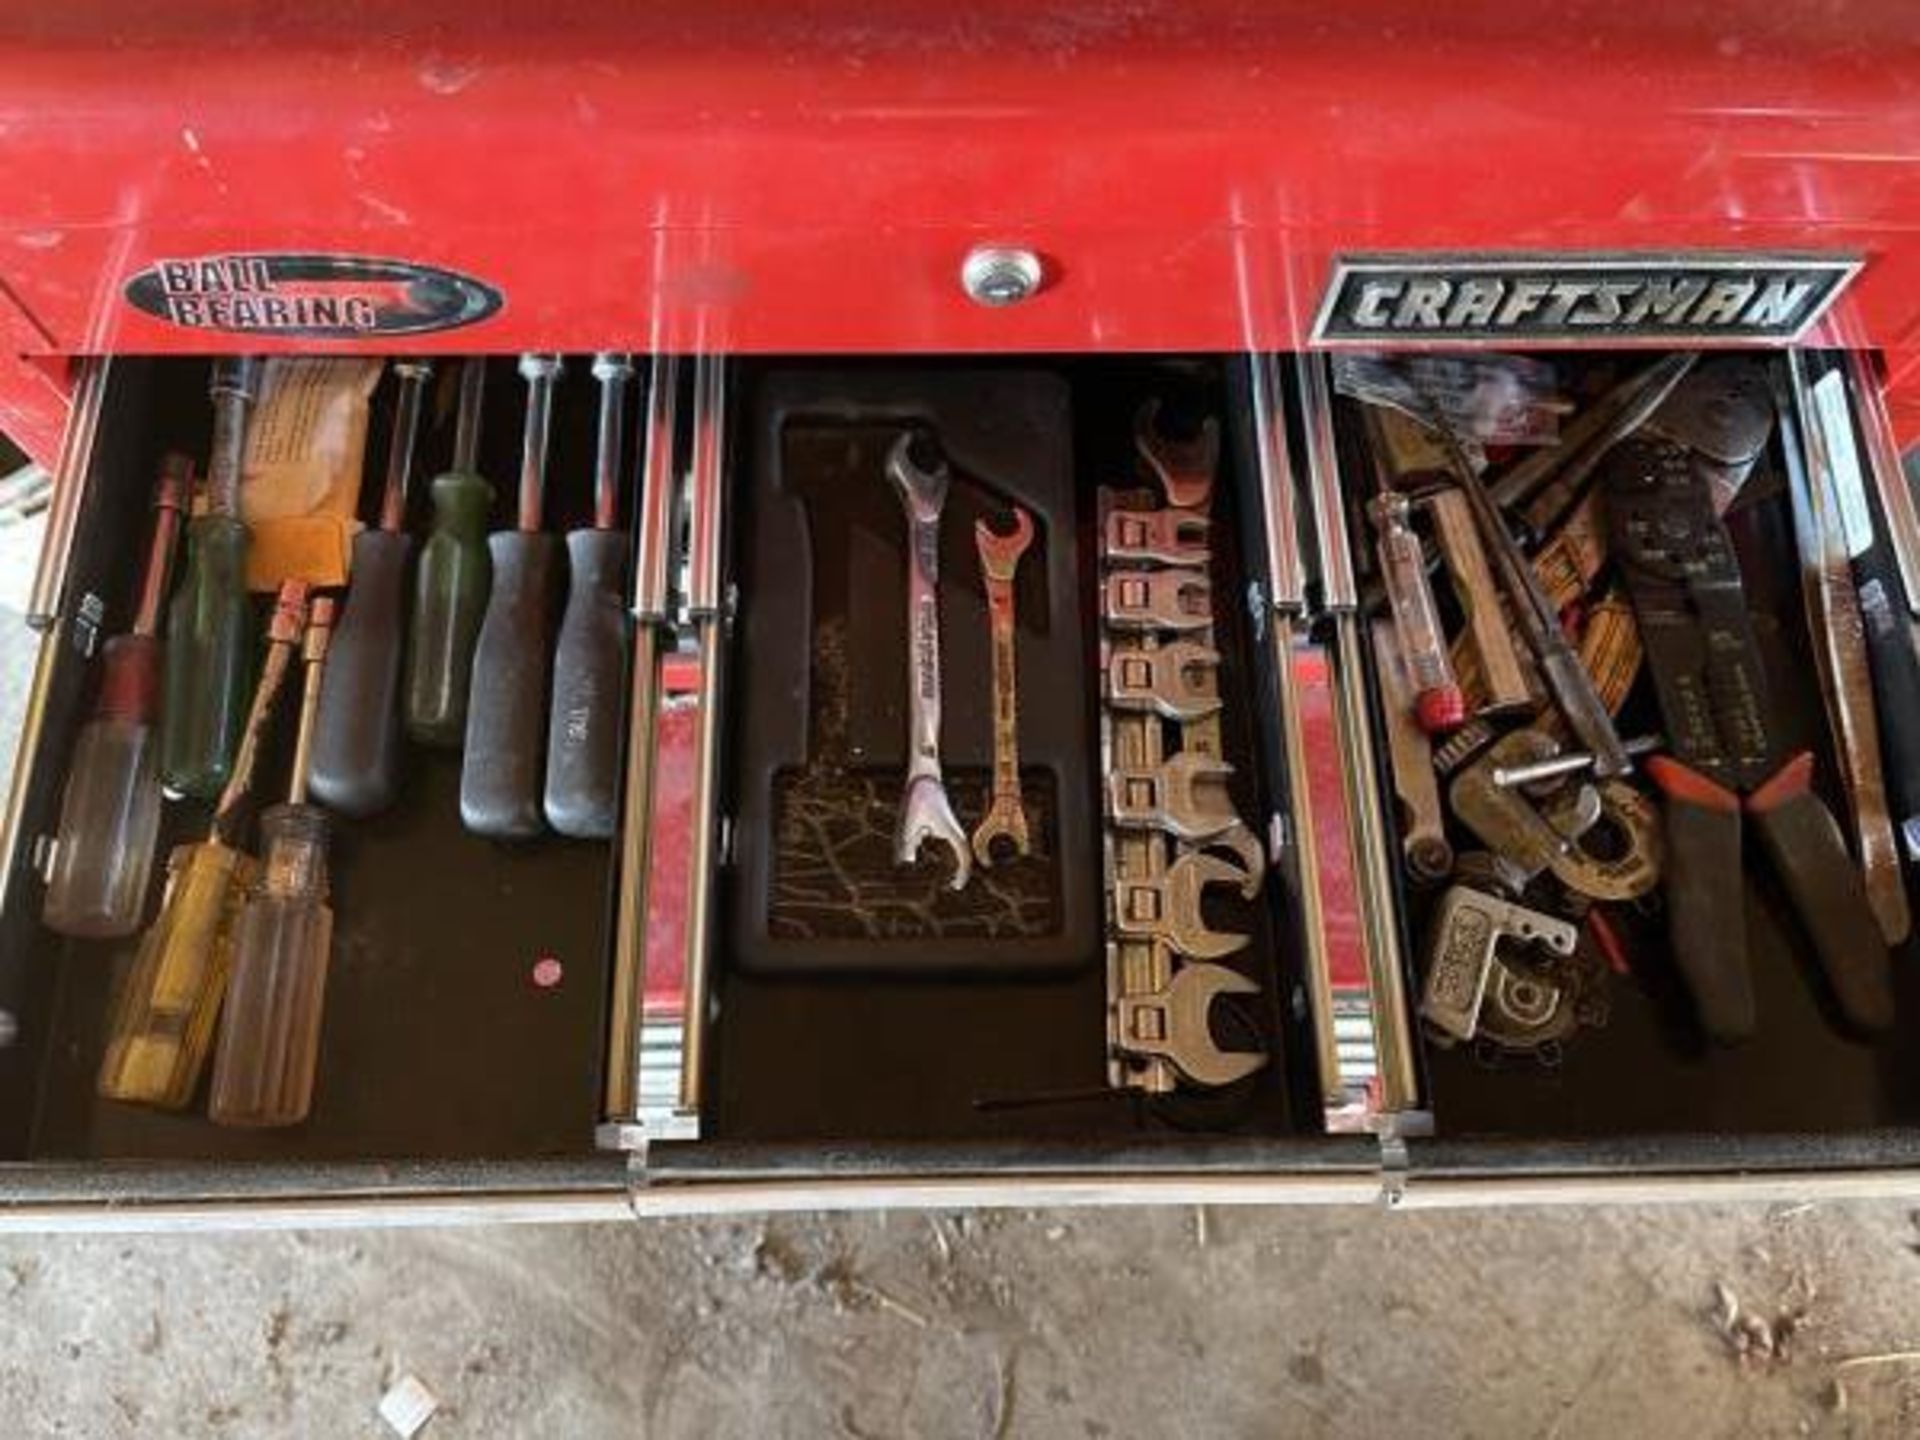 Craftsman Rolling Toolbox with Tools including Wrenches, Sockets, Screwdrivers, Pliers - Image 4 of 12